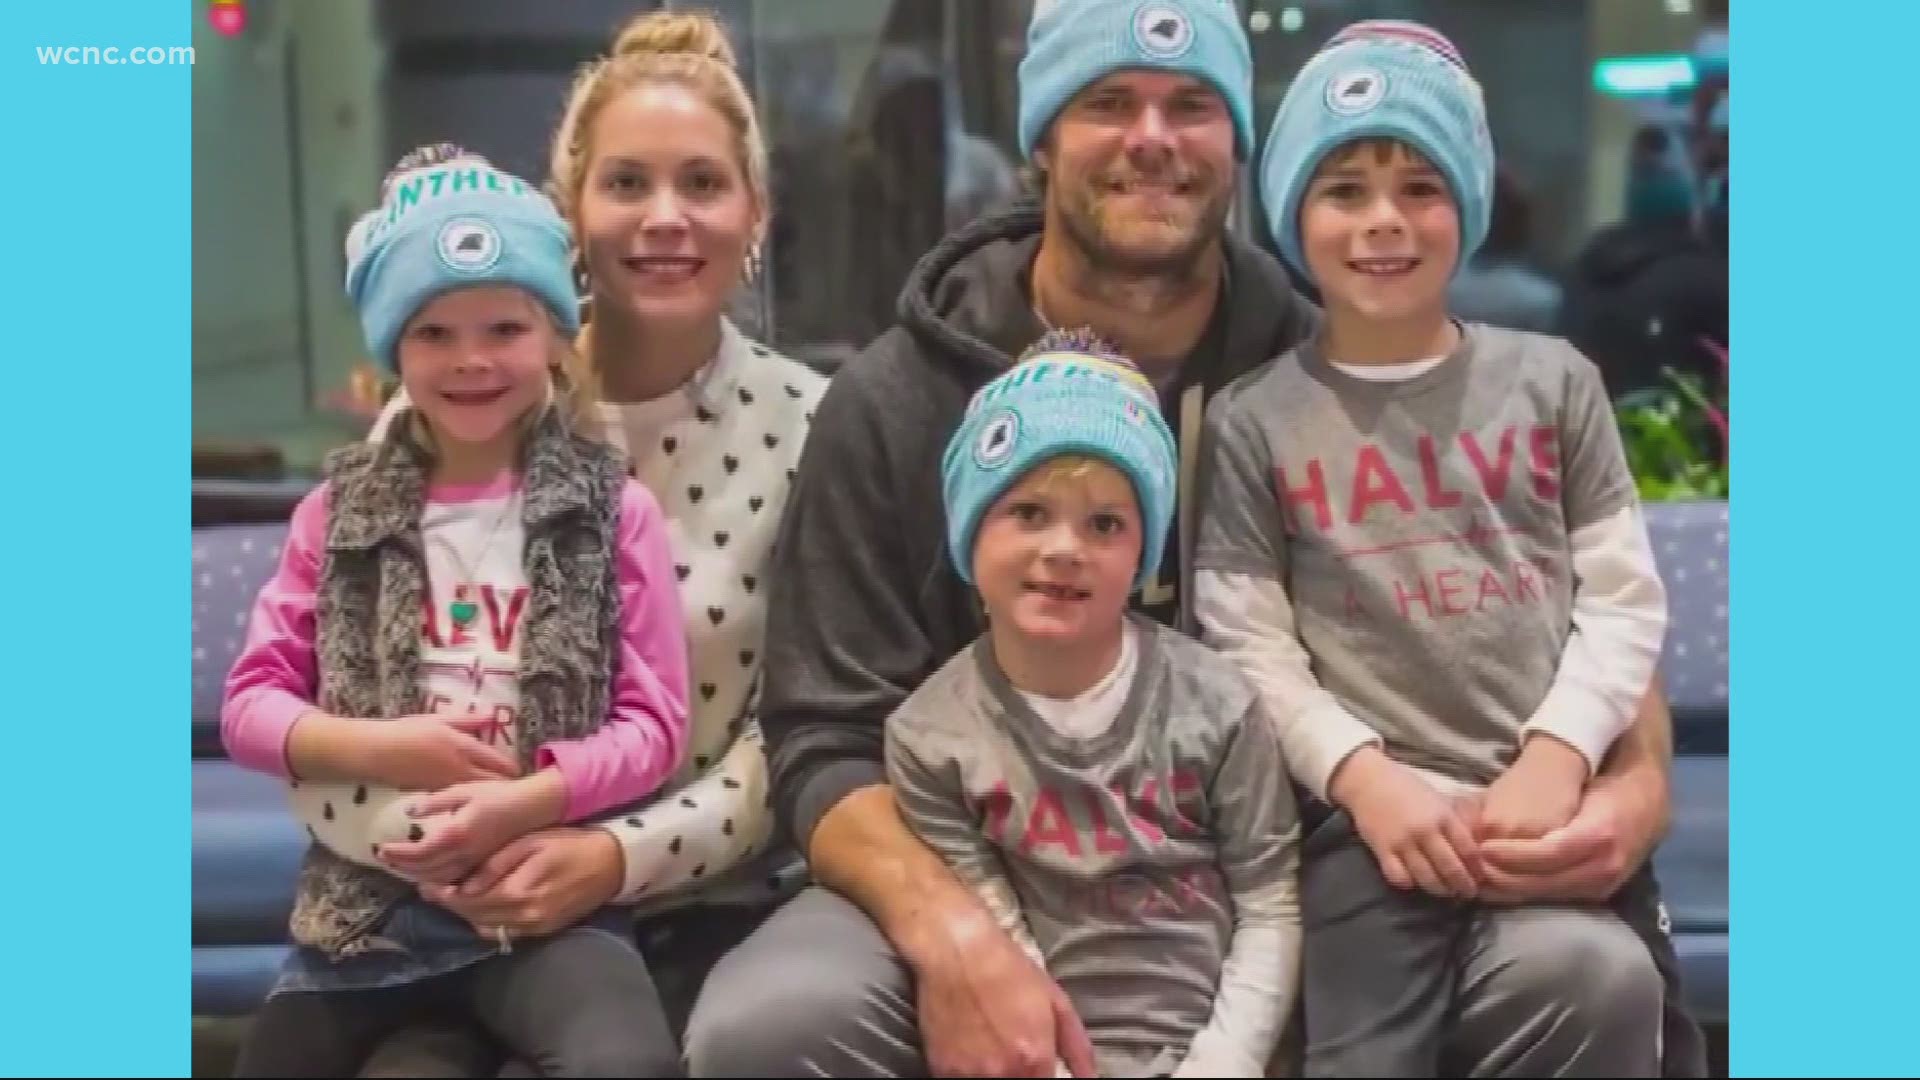 Olsen and his wife Kara launched the HEARTest Yard Foundation after their son, TJ, was born with a congenital heart disease in 2012.